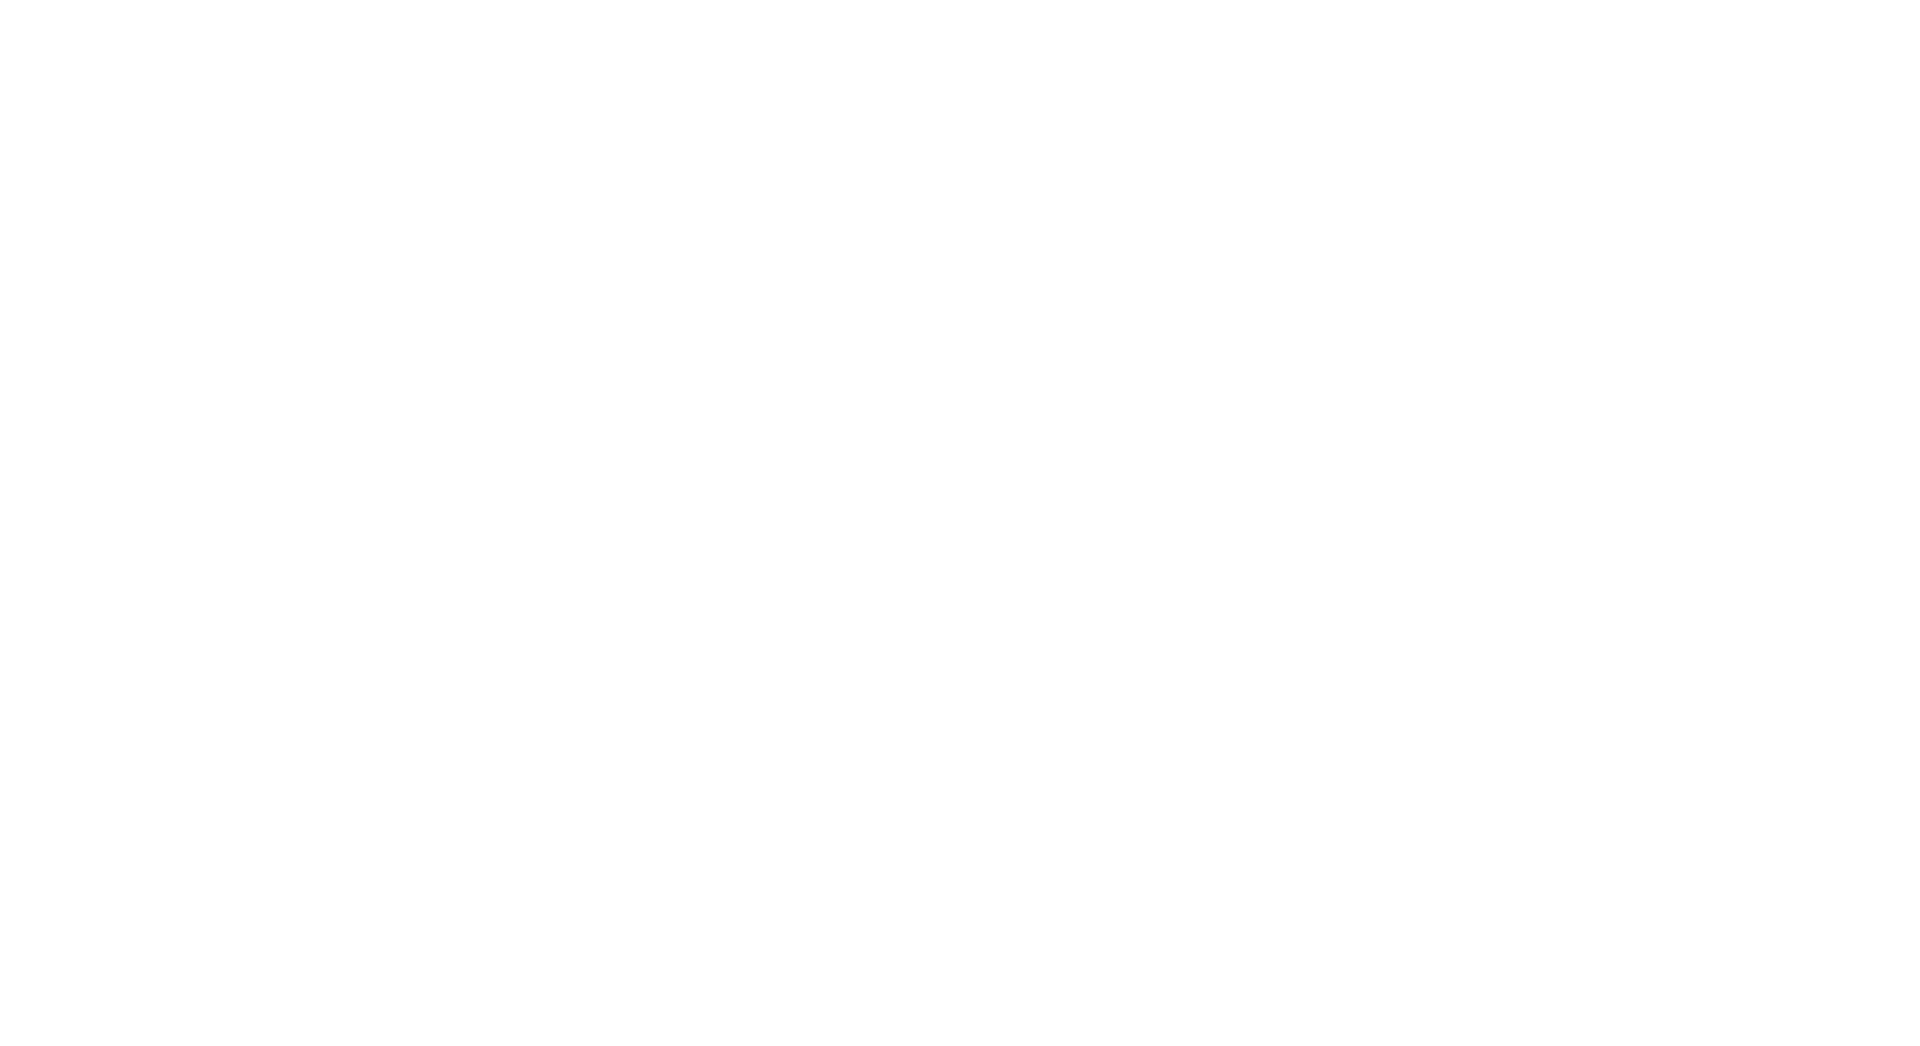 OPEN CASTING 2023 - ARE YOU READY TO JOIN THE GOOD SQUAD?